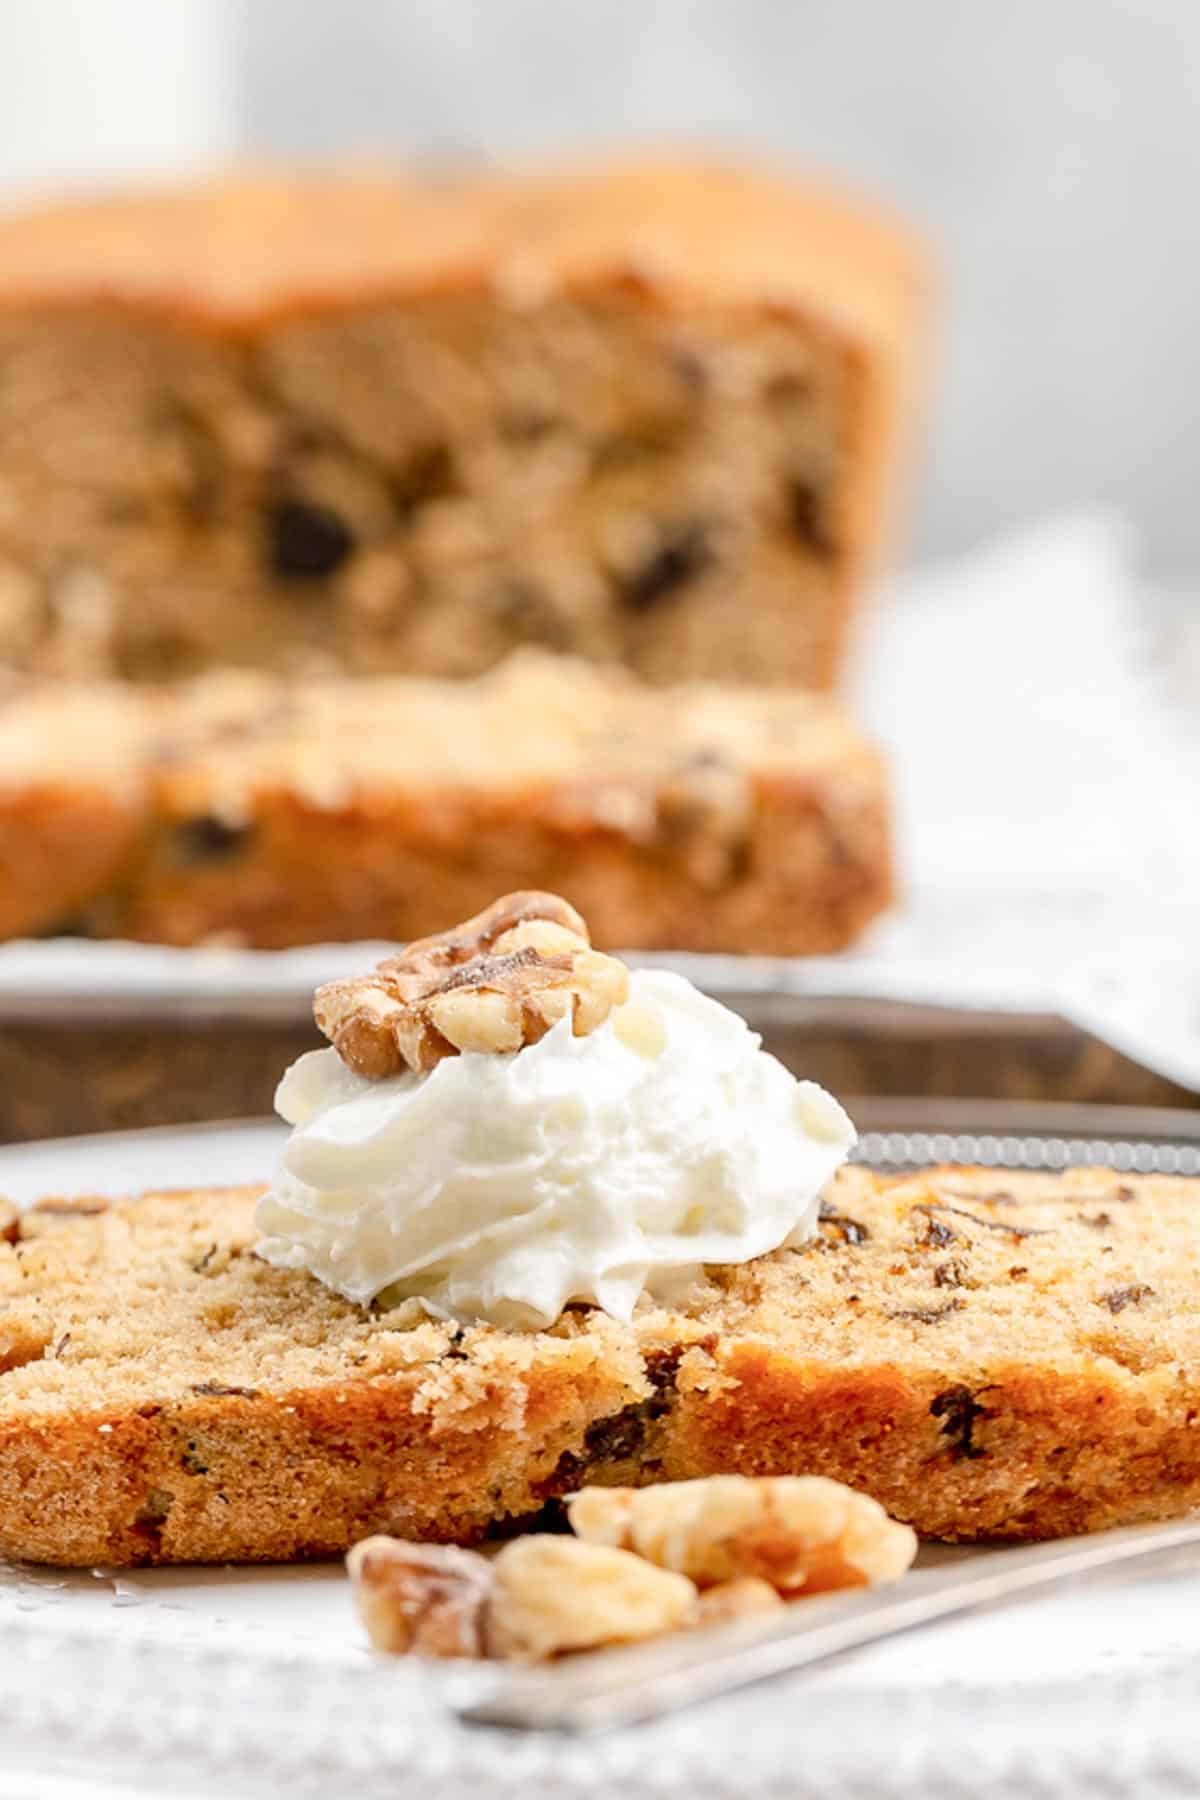 Closeup of a slice of prune cake topped with whipped cream and a walnut.